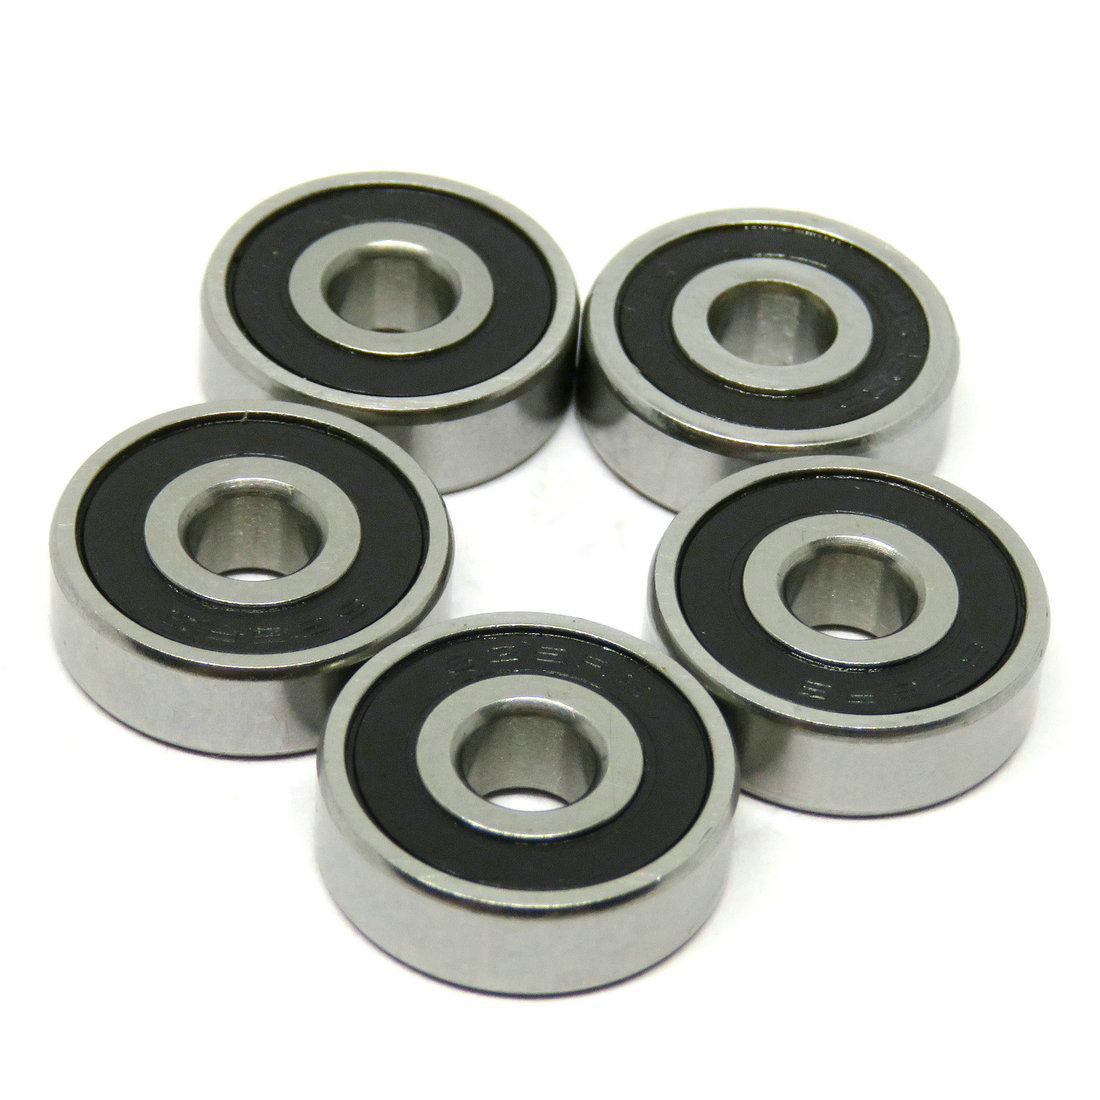 ABEC-3 625-2RS Deep Groove Ball Bearing 5x16x5mm Double Sealed 625RS For 3D Printer.jpg